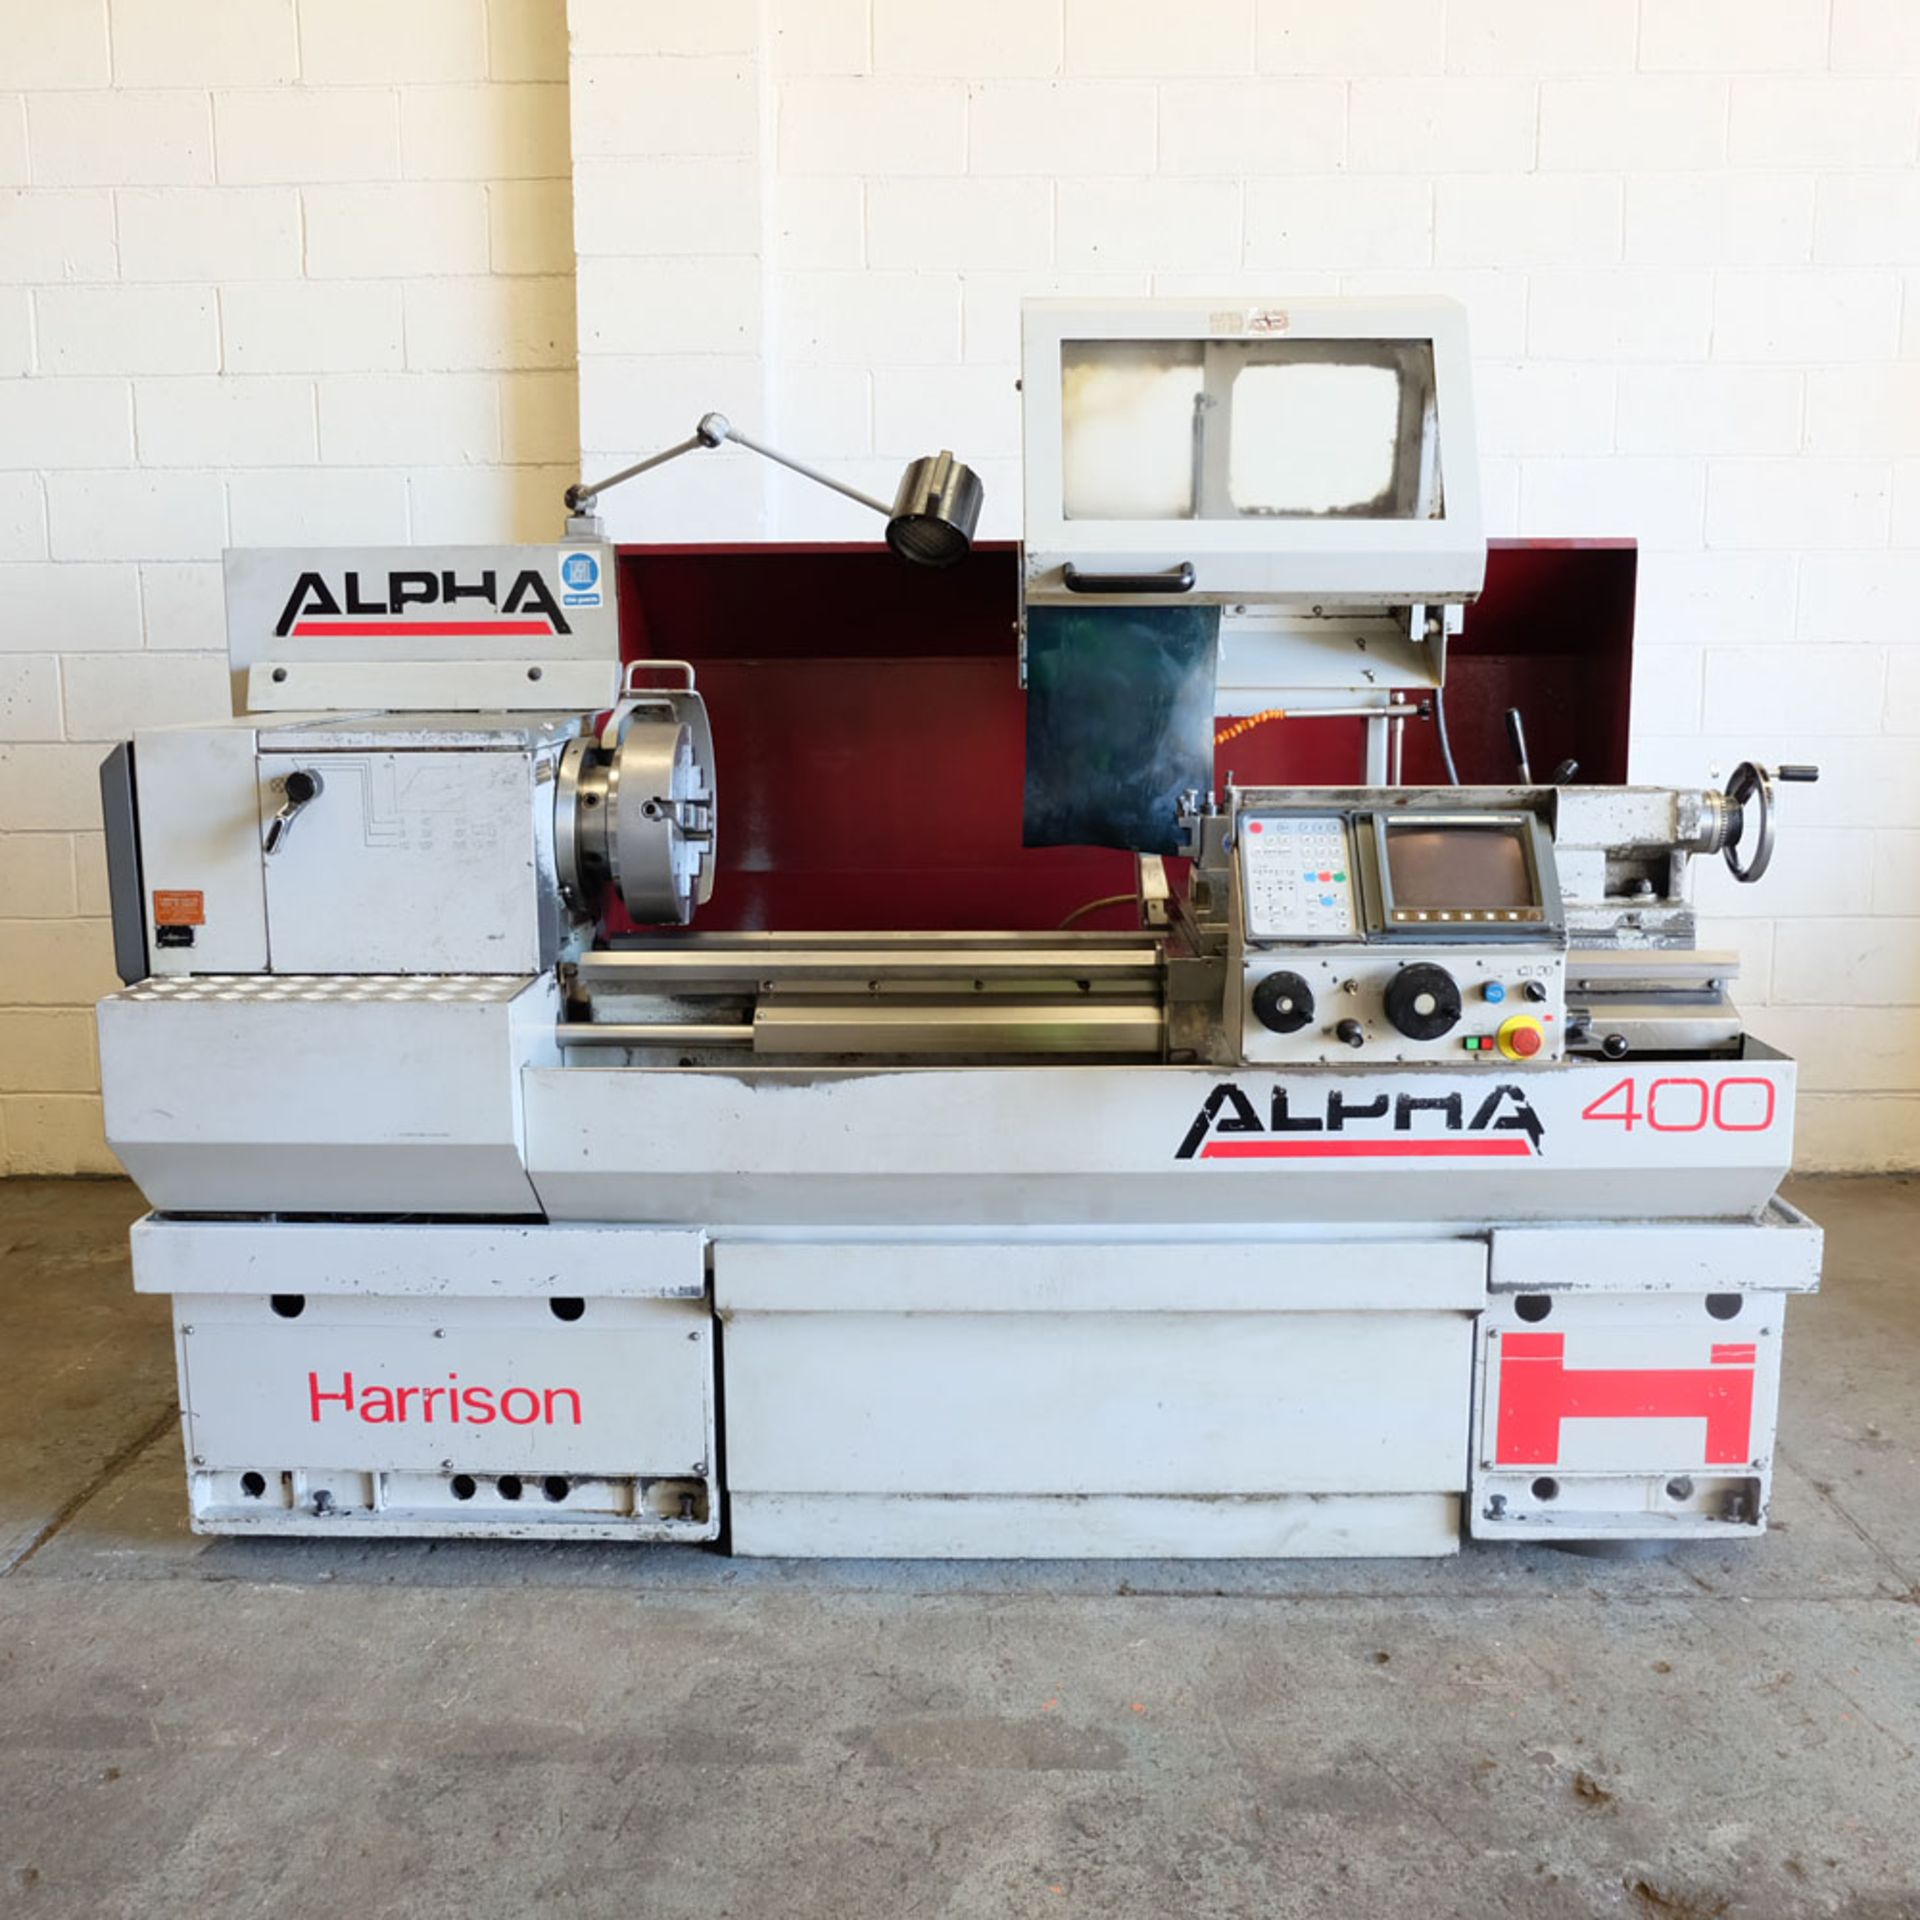 Harrison Alpha 400 CNC Lathe. Swing Over Bed: 400mm. Between Centres: 1250mm. Speeds: 15-2500rpm.